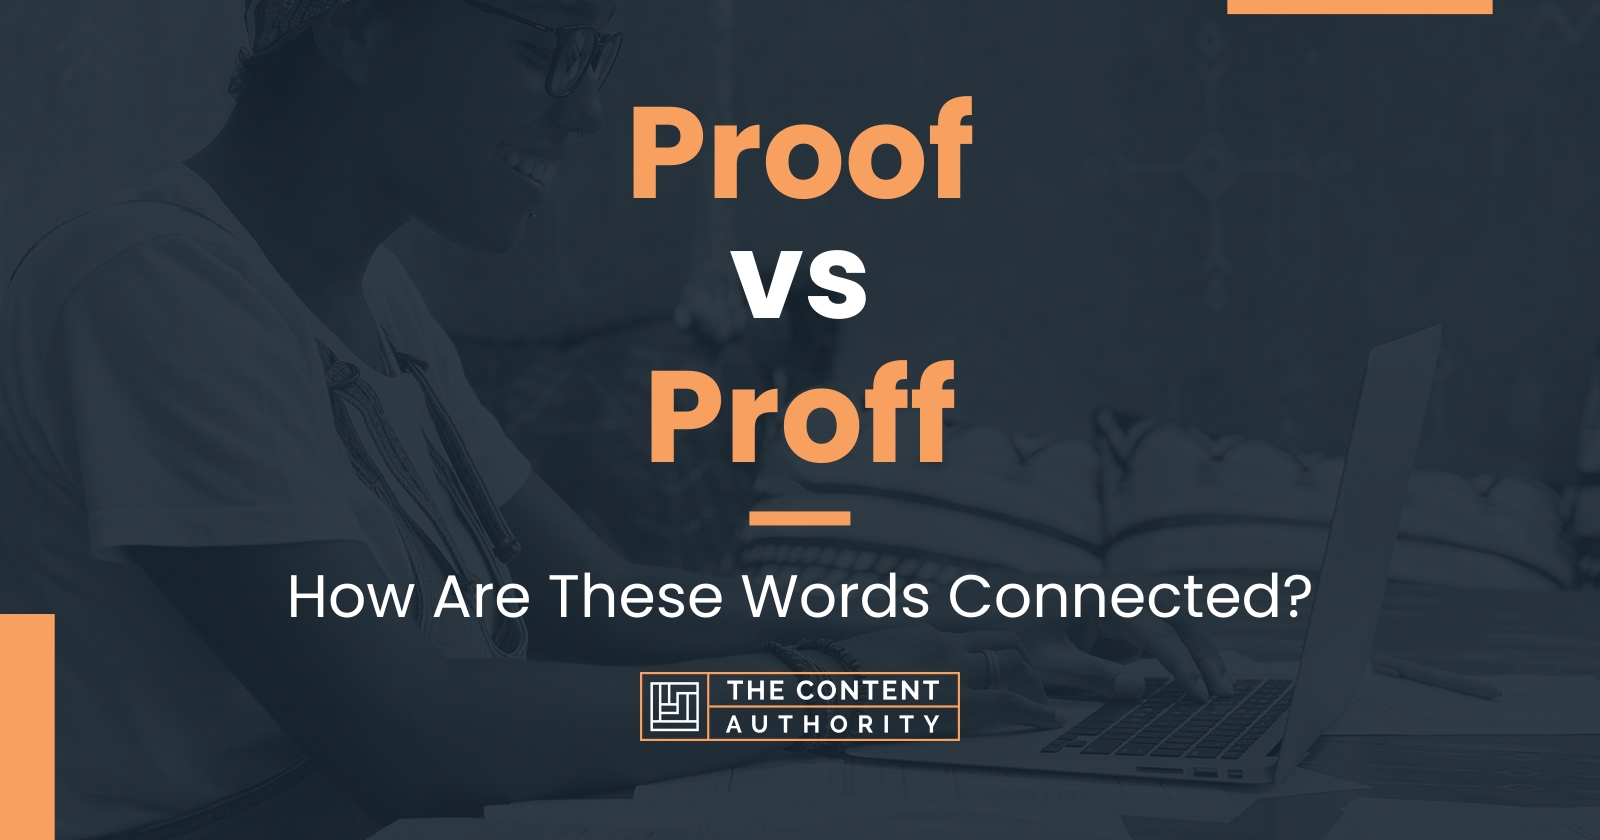 Proof vs Proff: How Are These Words Connected?